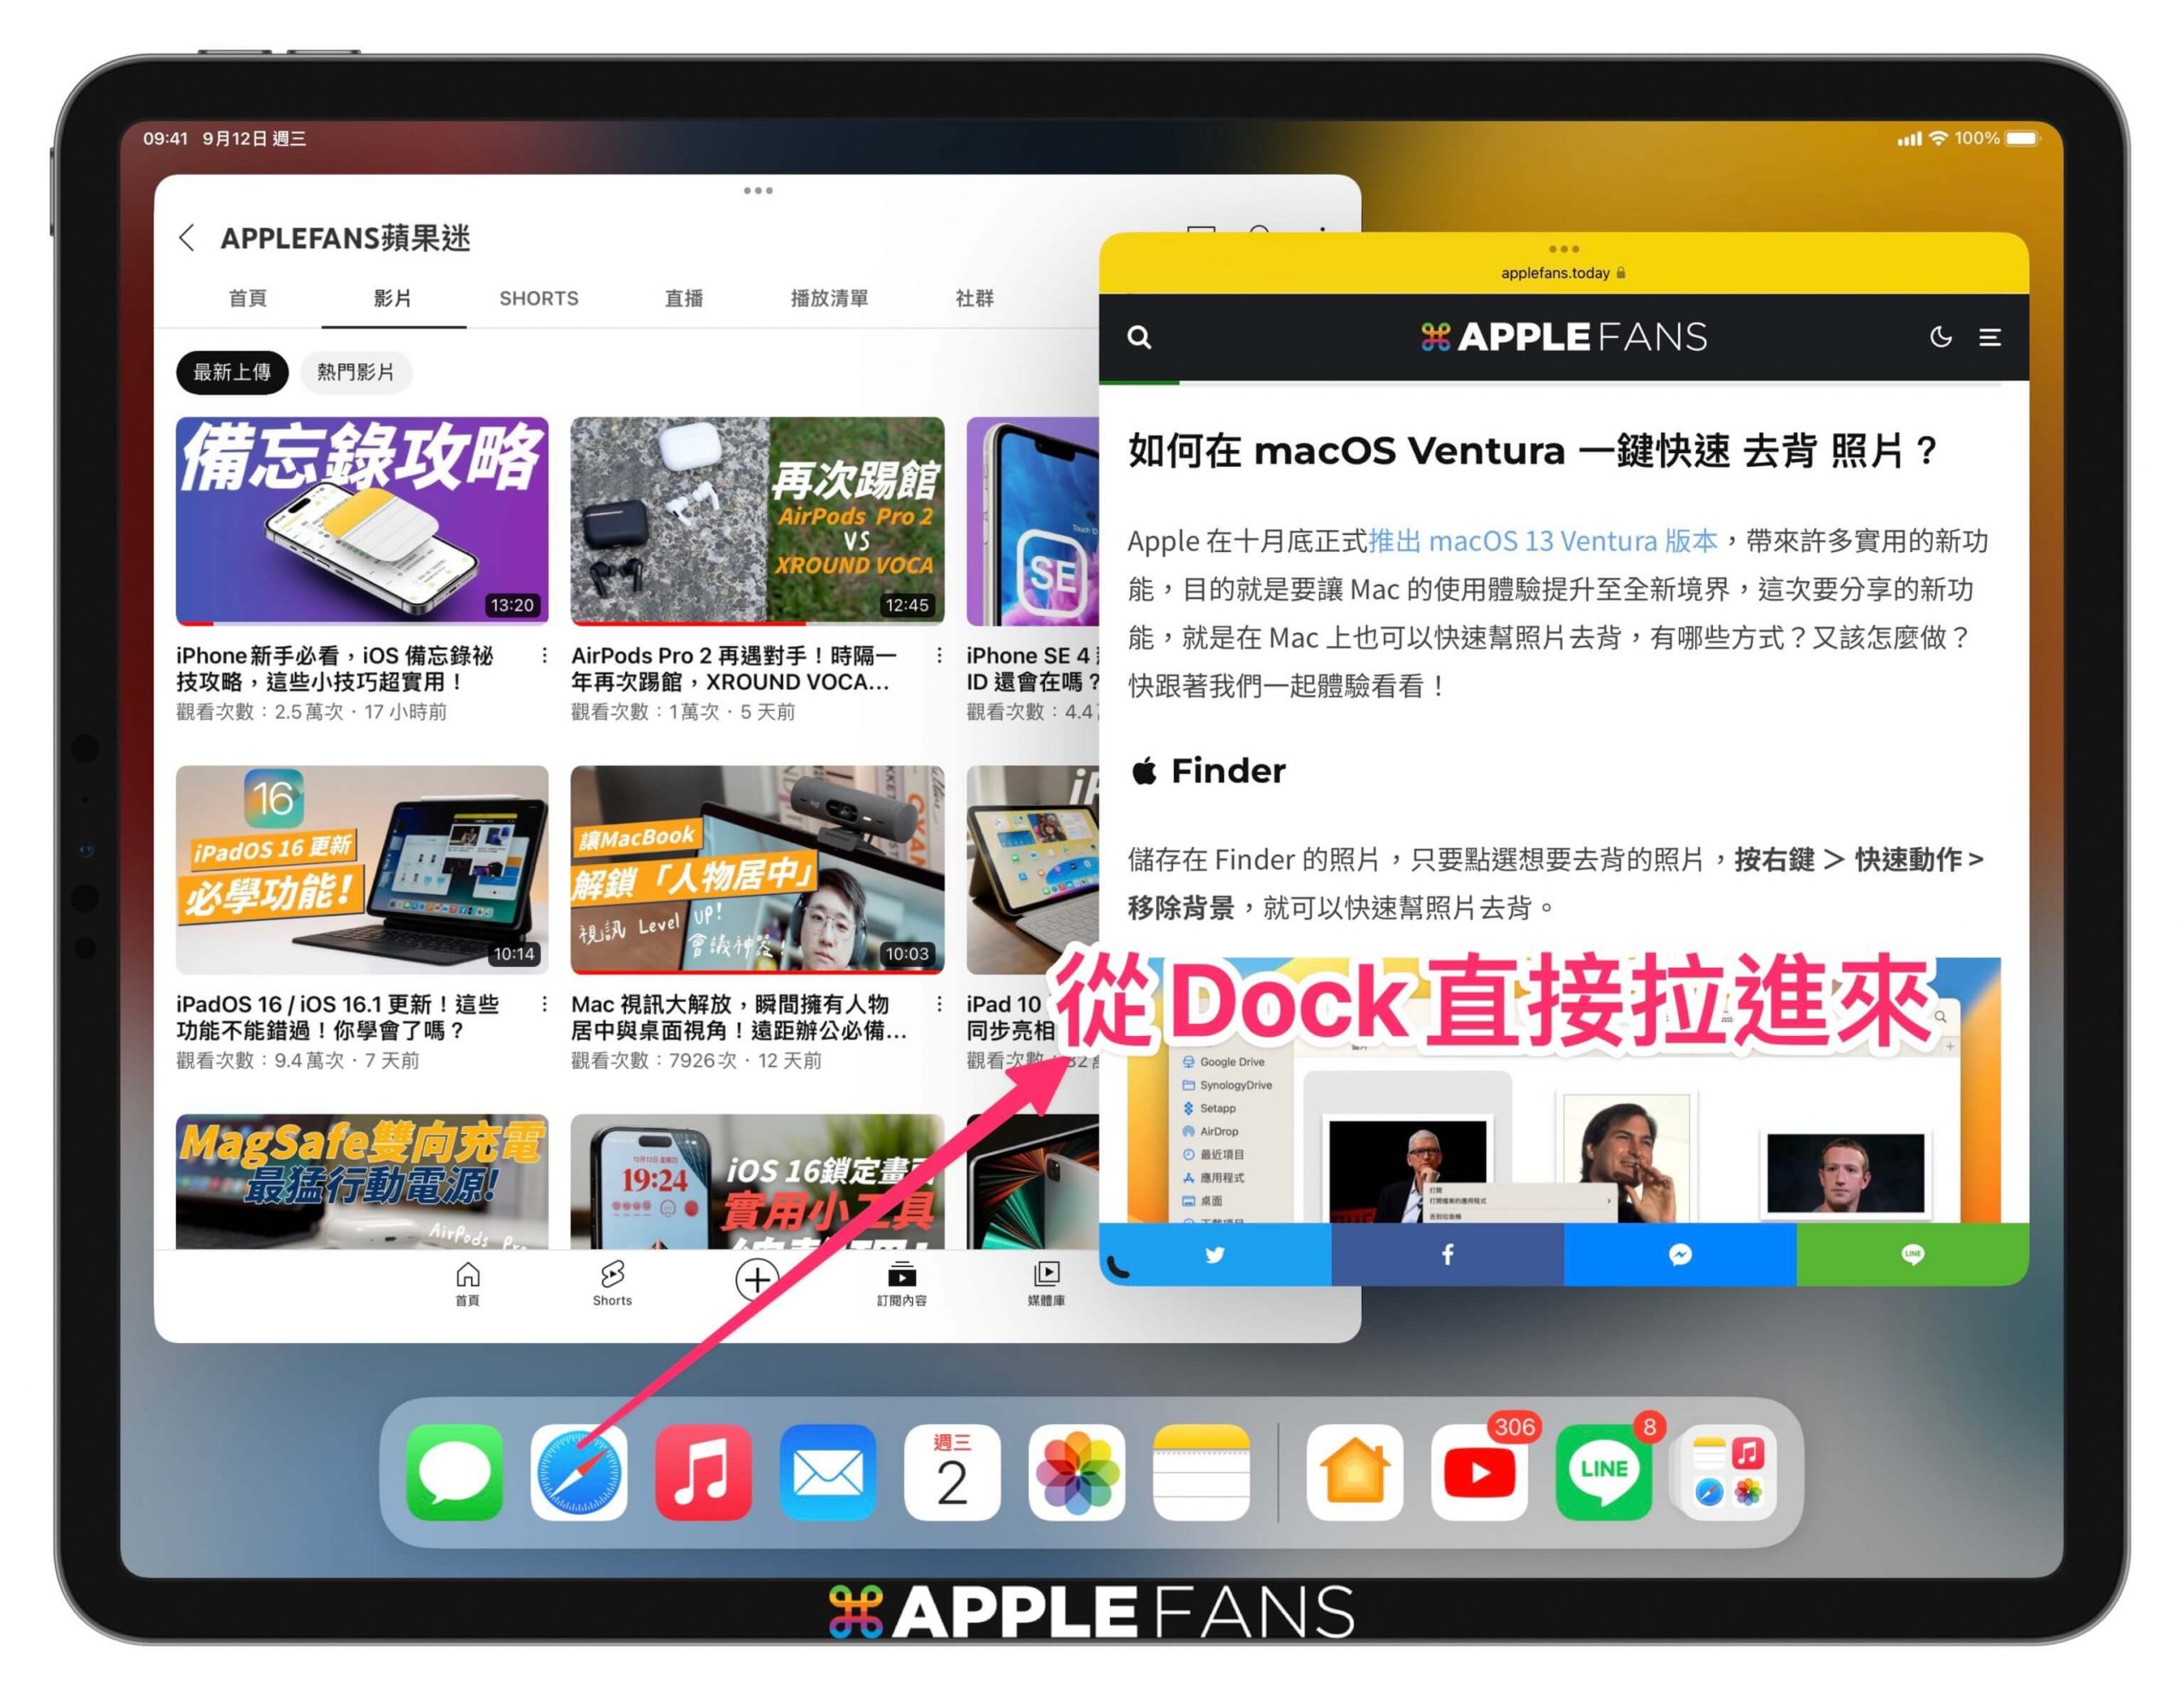 iPadOS 幕前調度 Stage Manager